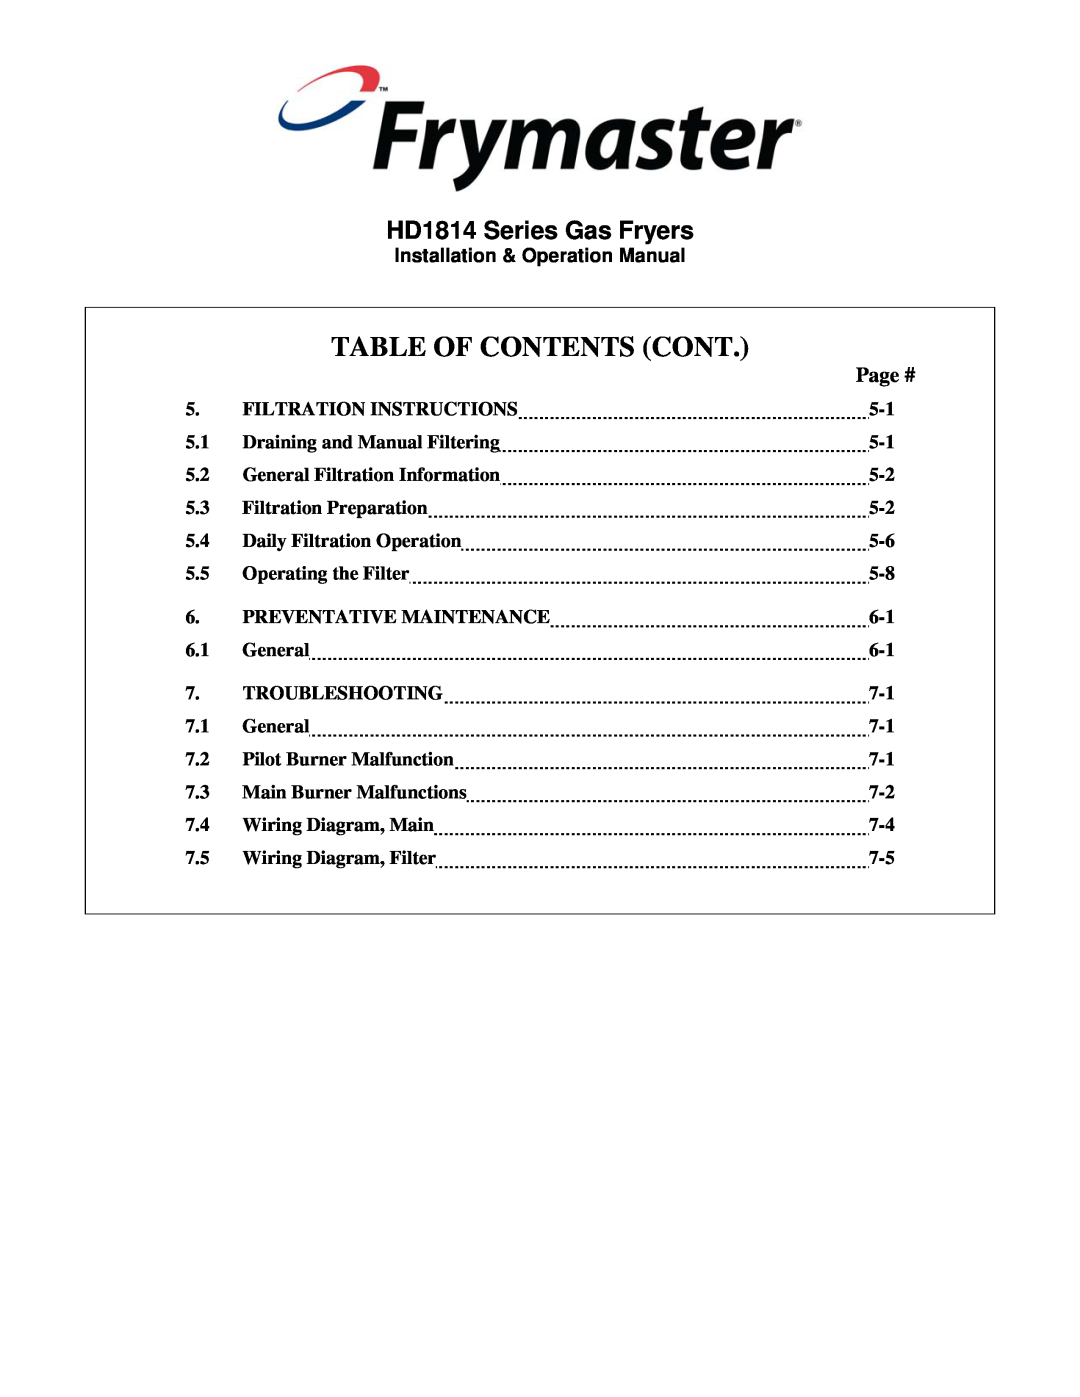 Frymaster HD21814G, HD1814G, HD21814150G operation manual Table Of Contents Cont, Page #, HD1814 Series Gas Fryers 